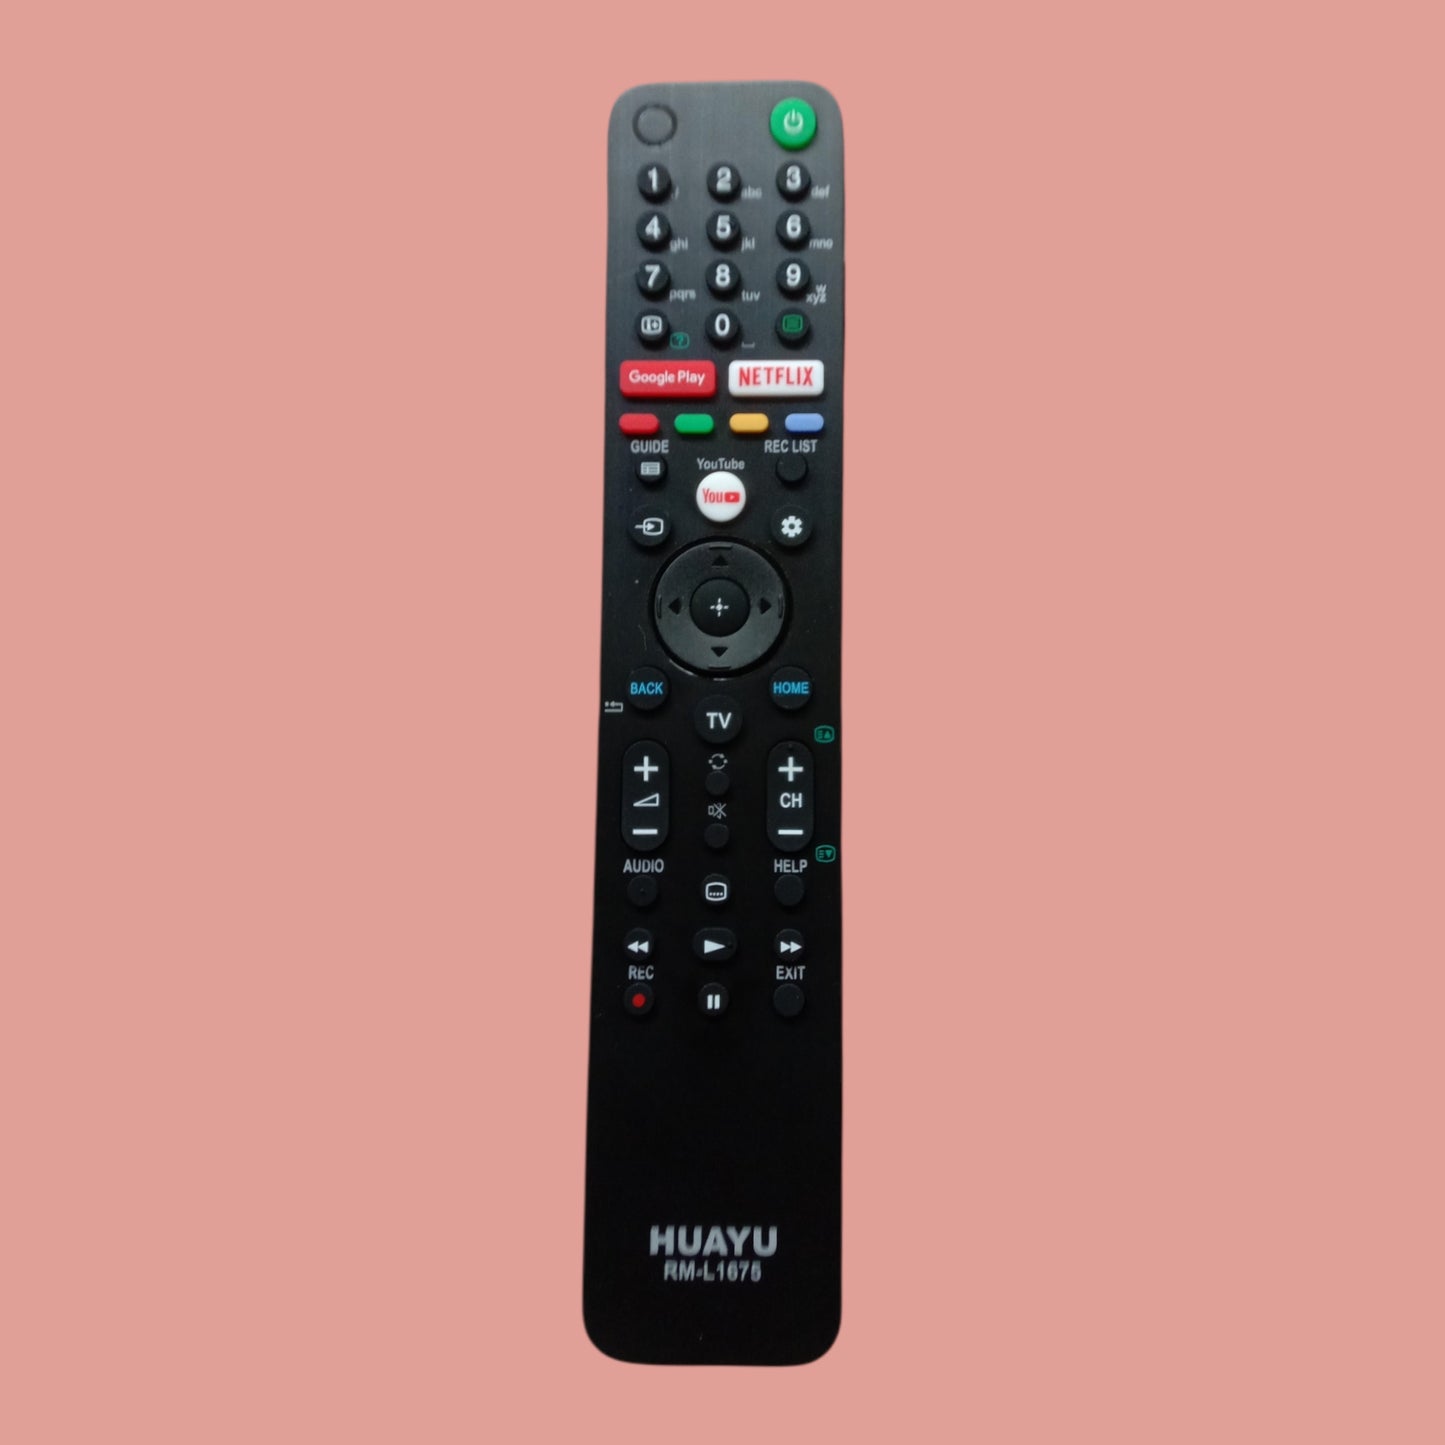 Sony Smart TV remote control with Googleplay and Youtube and Netflix